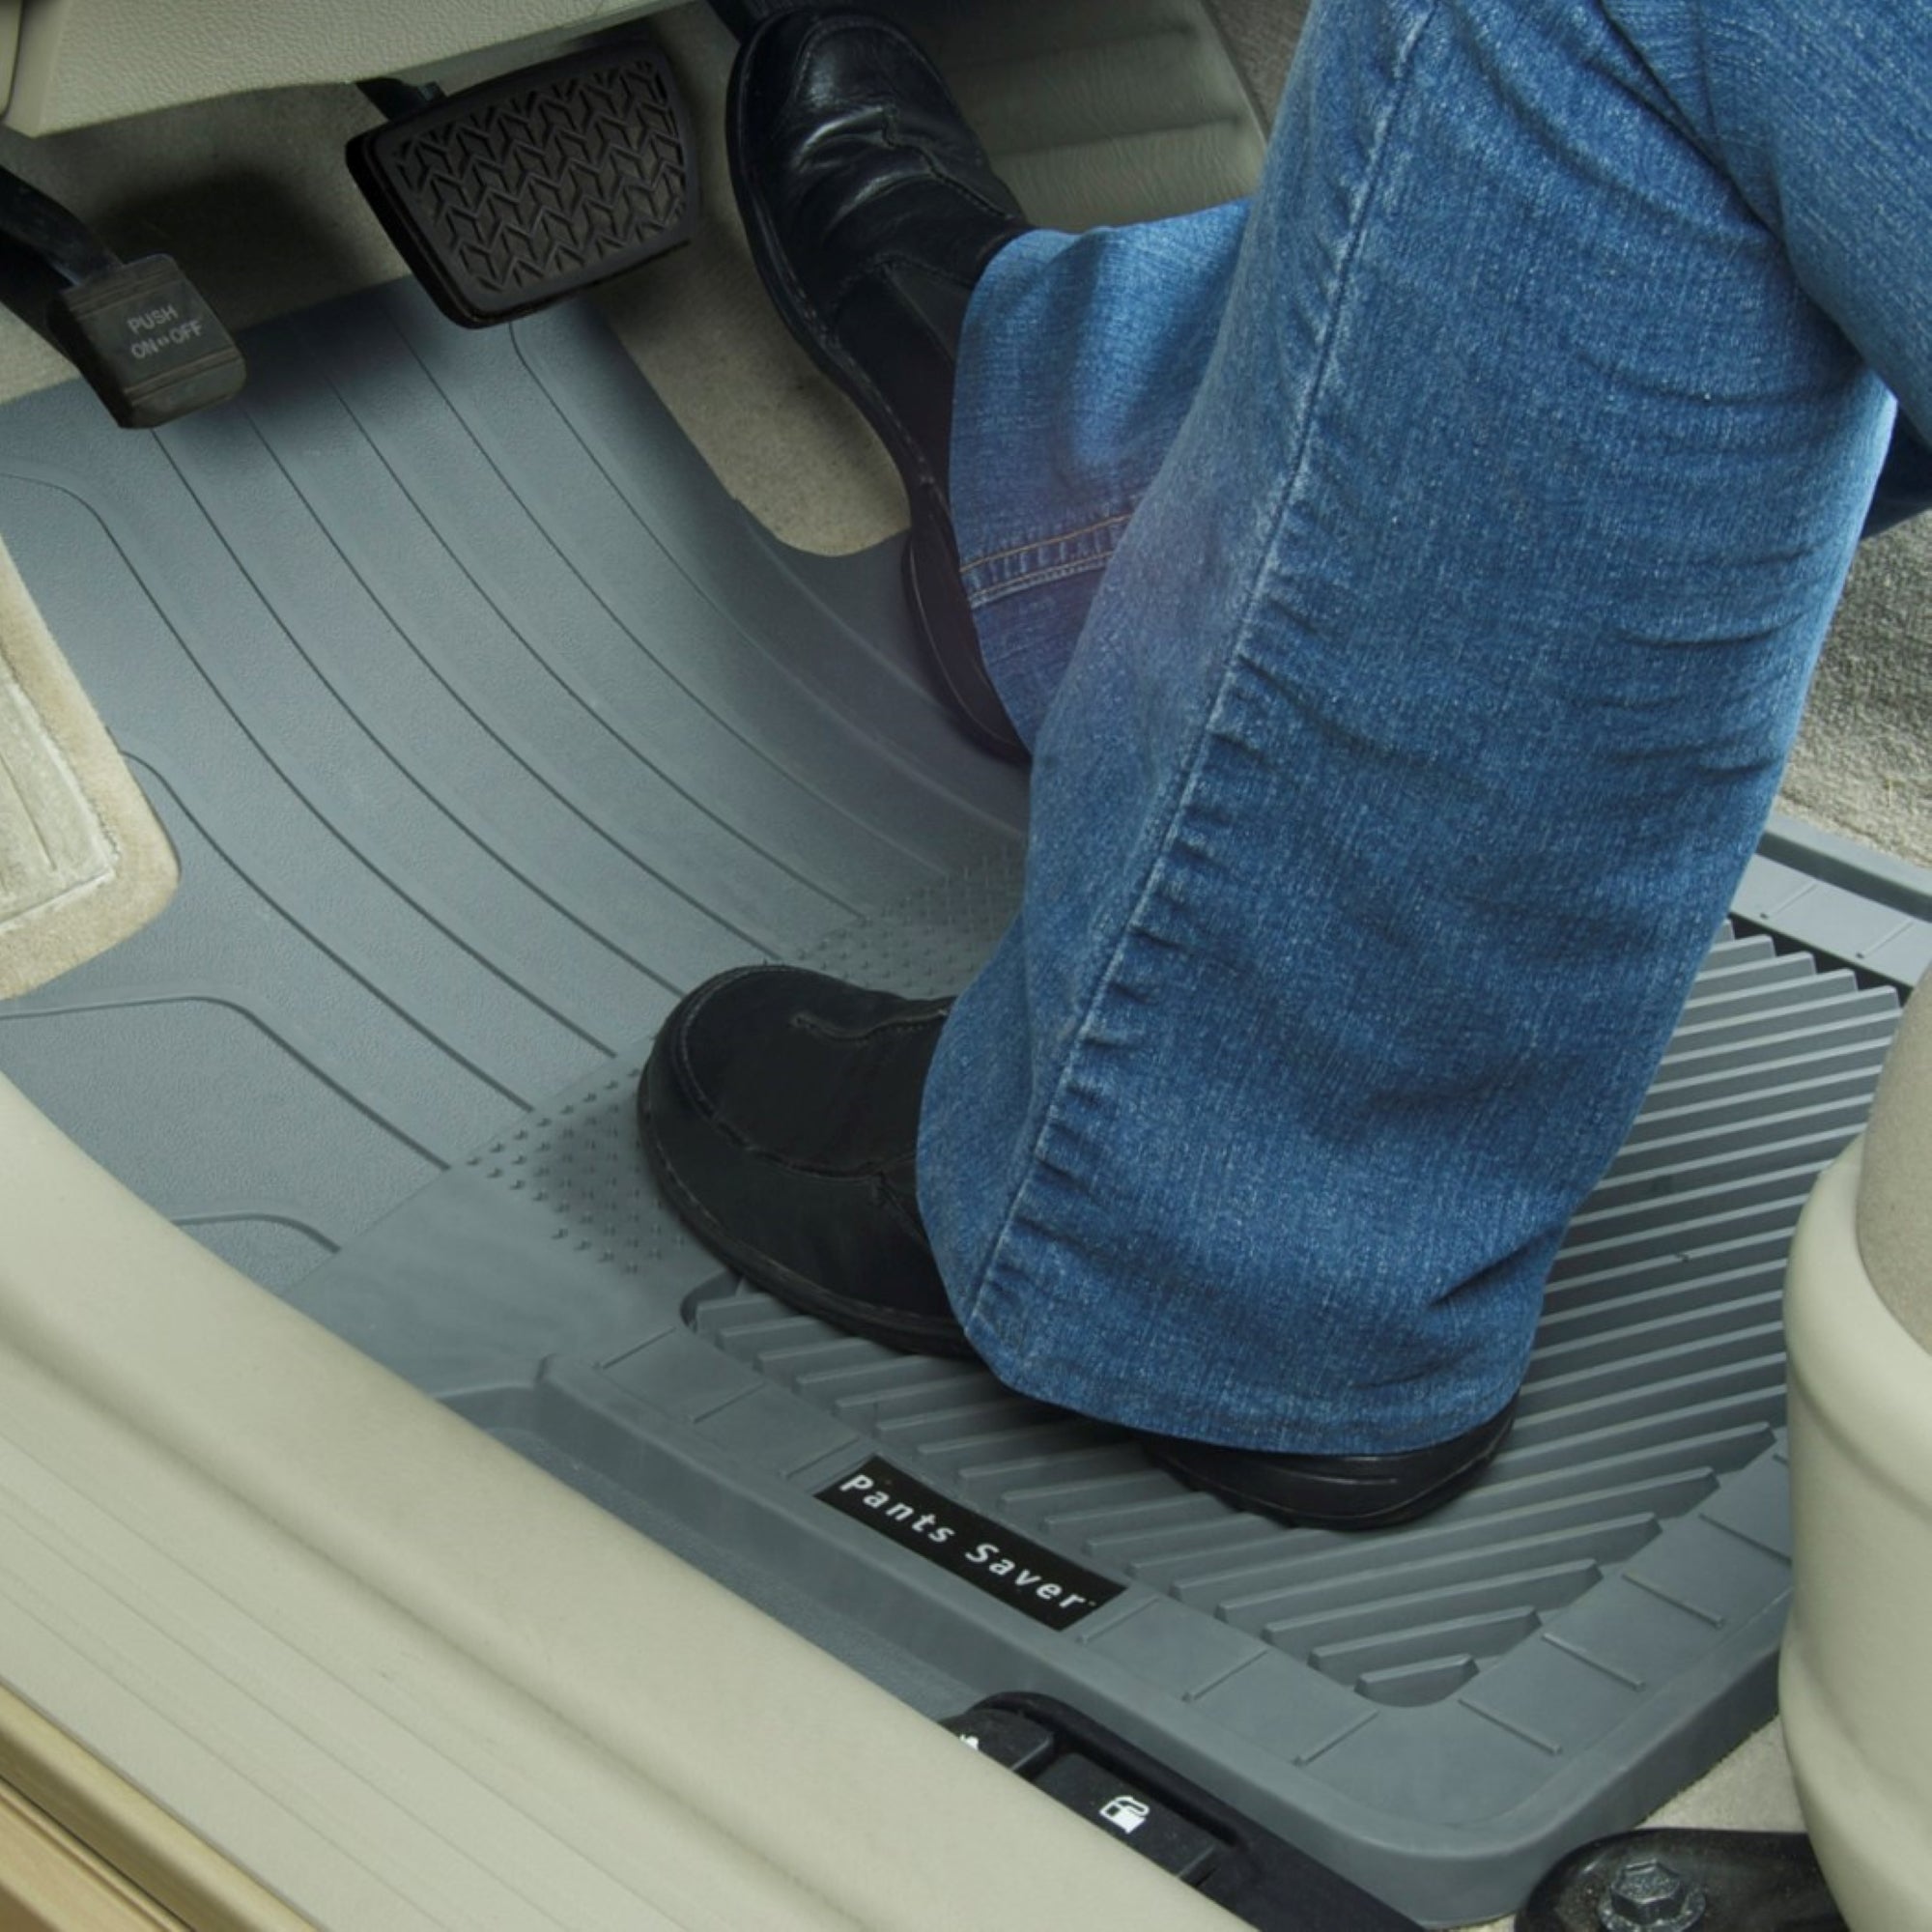 Lifestyle image of a gray PantsSaver custom fit car mat installed in the driver's seat of a vehicle with a person wearing blue jeans and black shoes sitting in the driver's seat